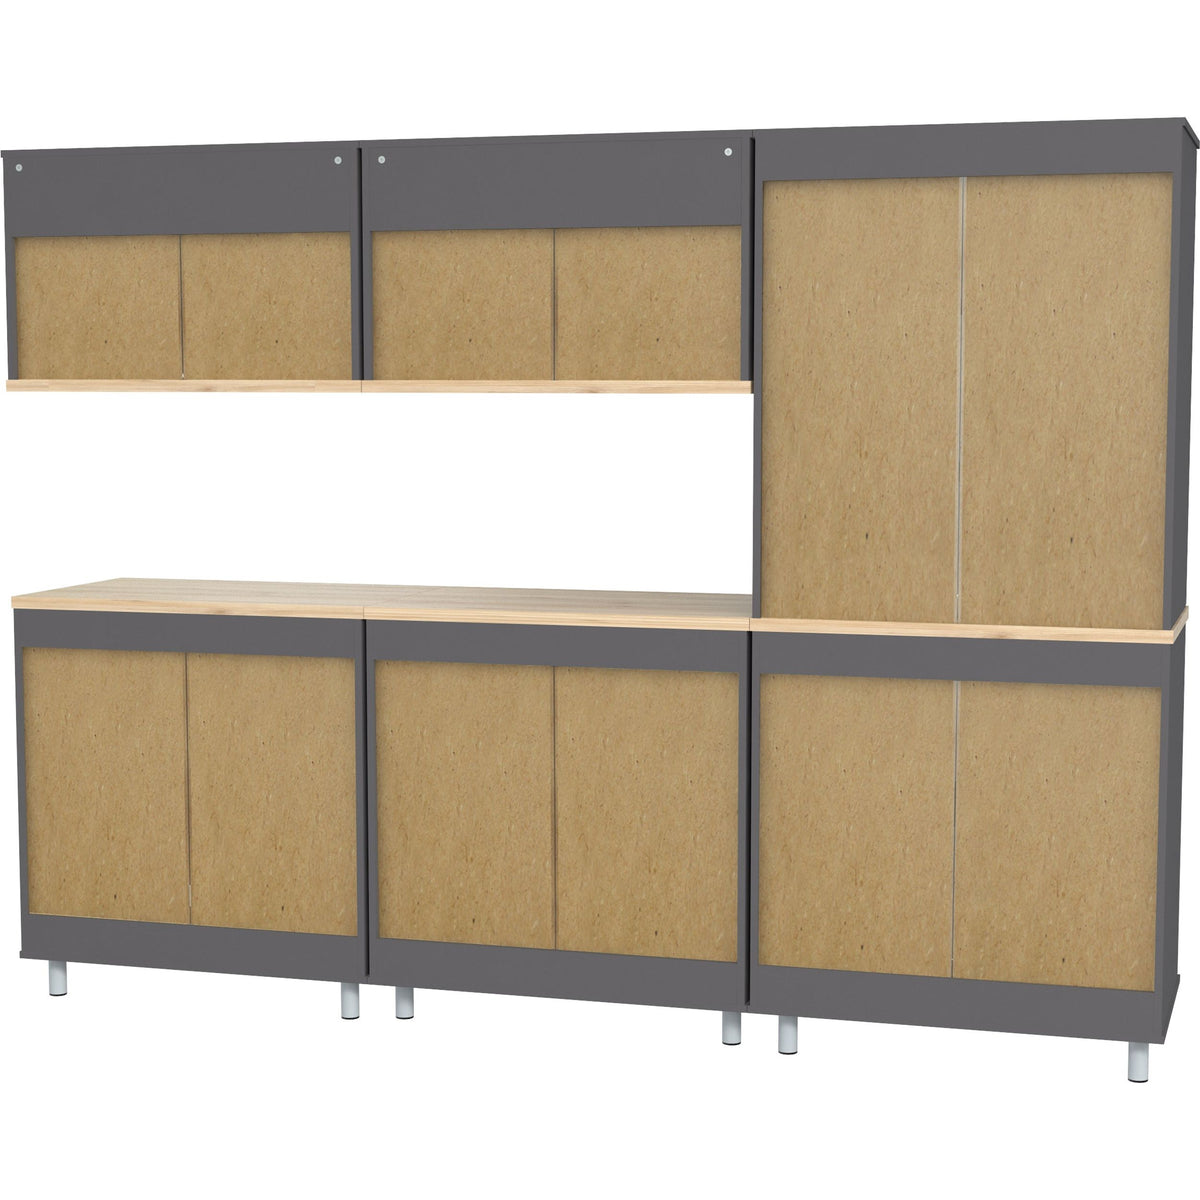 Rosy Brown Inval America KRATOS 5 Piece Garage System in Dark Gray and Maple GS-GP40